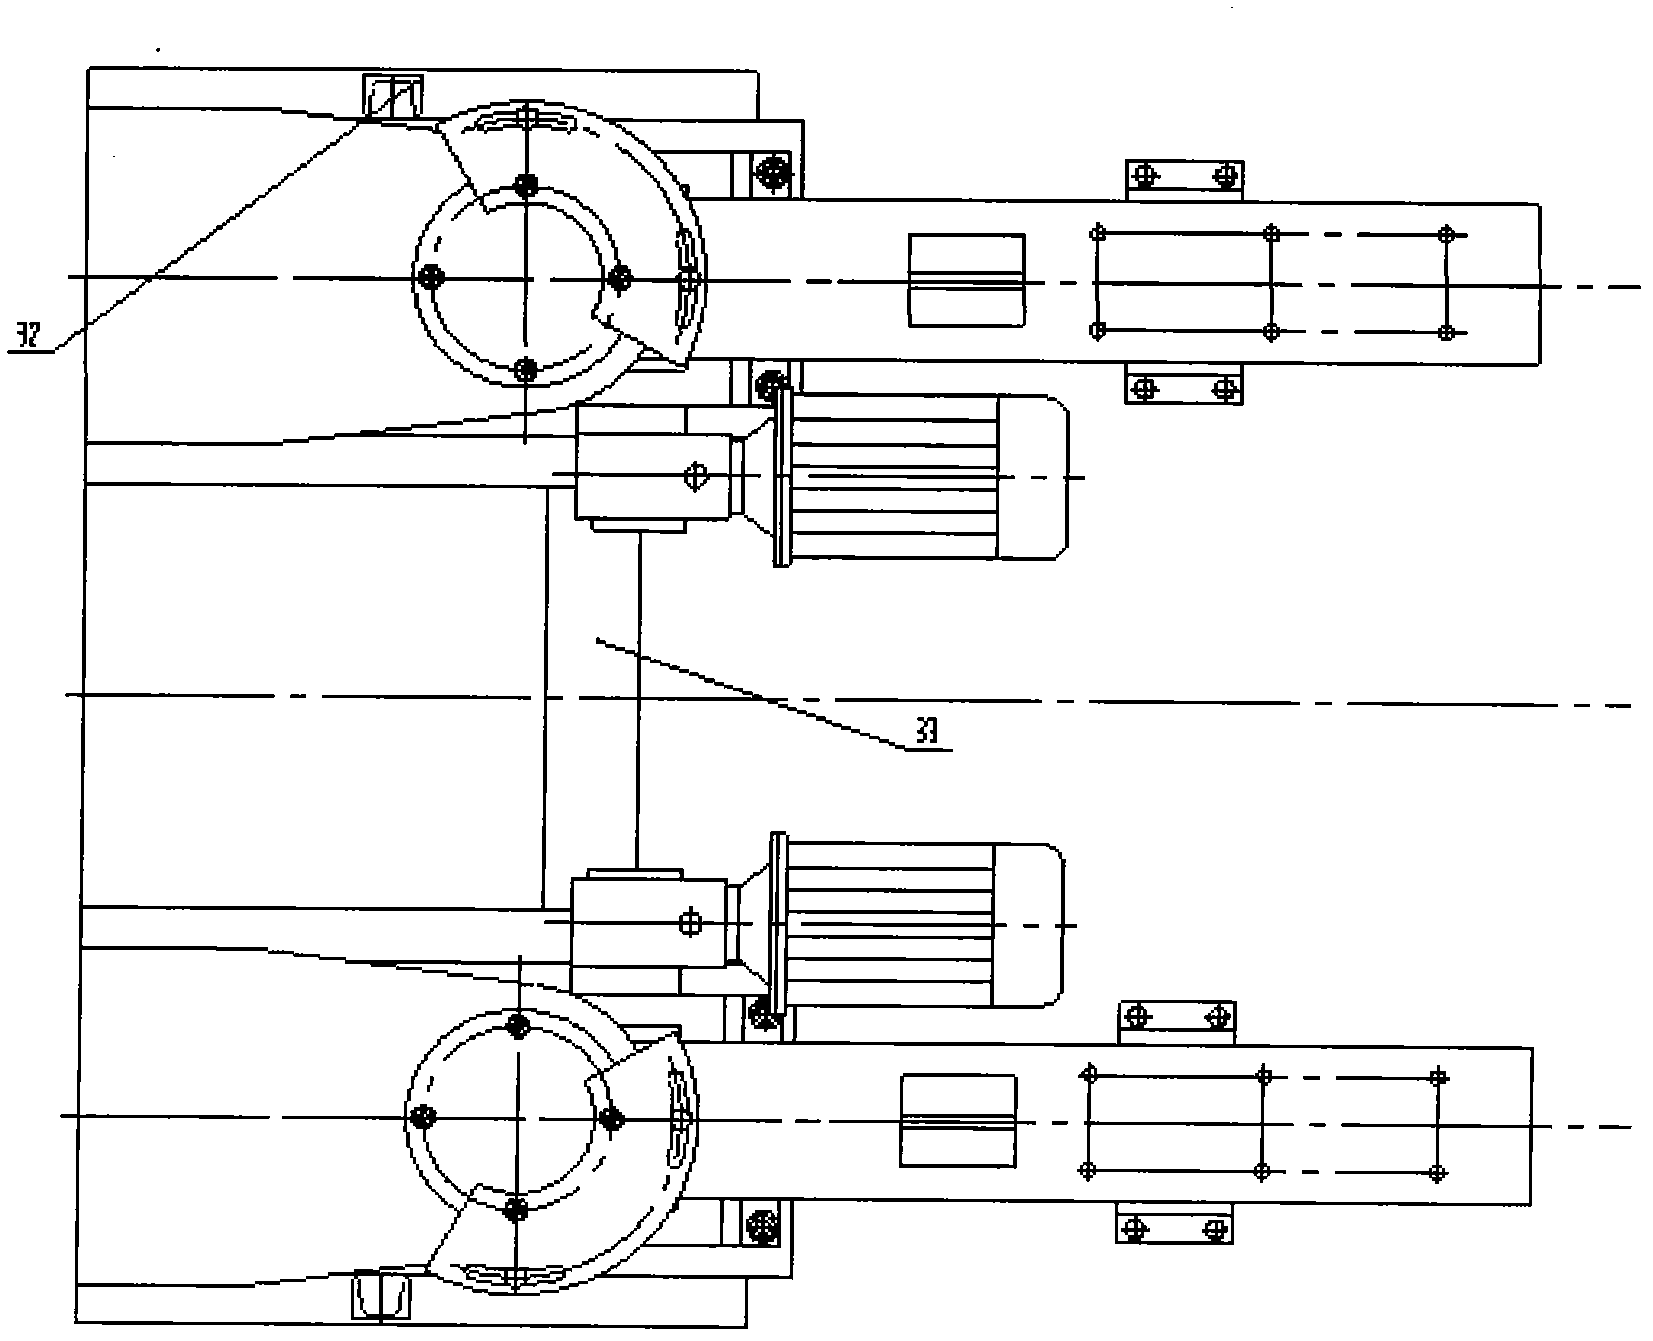 Swing arm drive device for spraying antifreeze on coal-carrying train